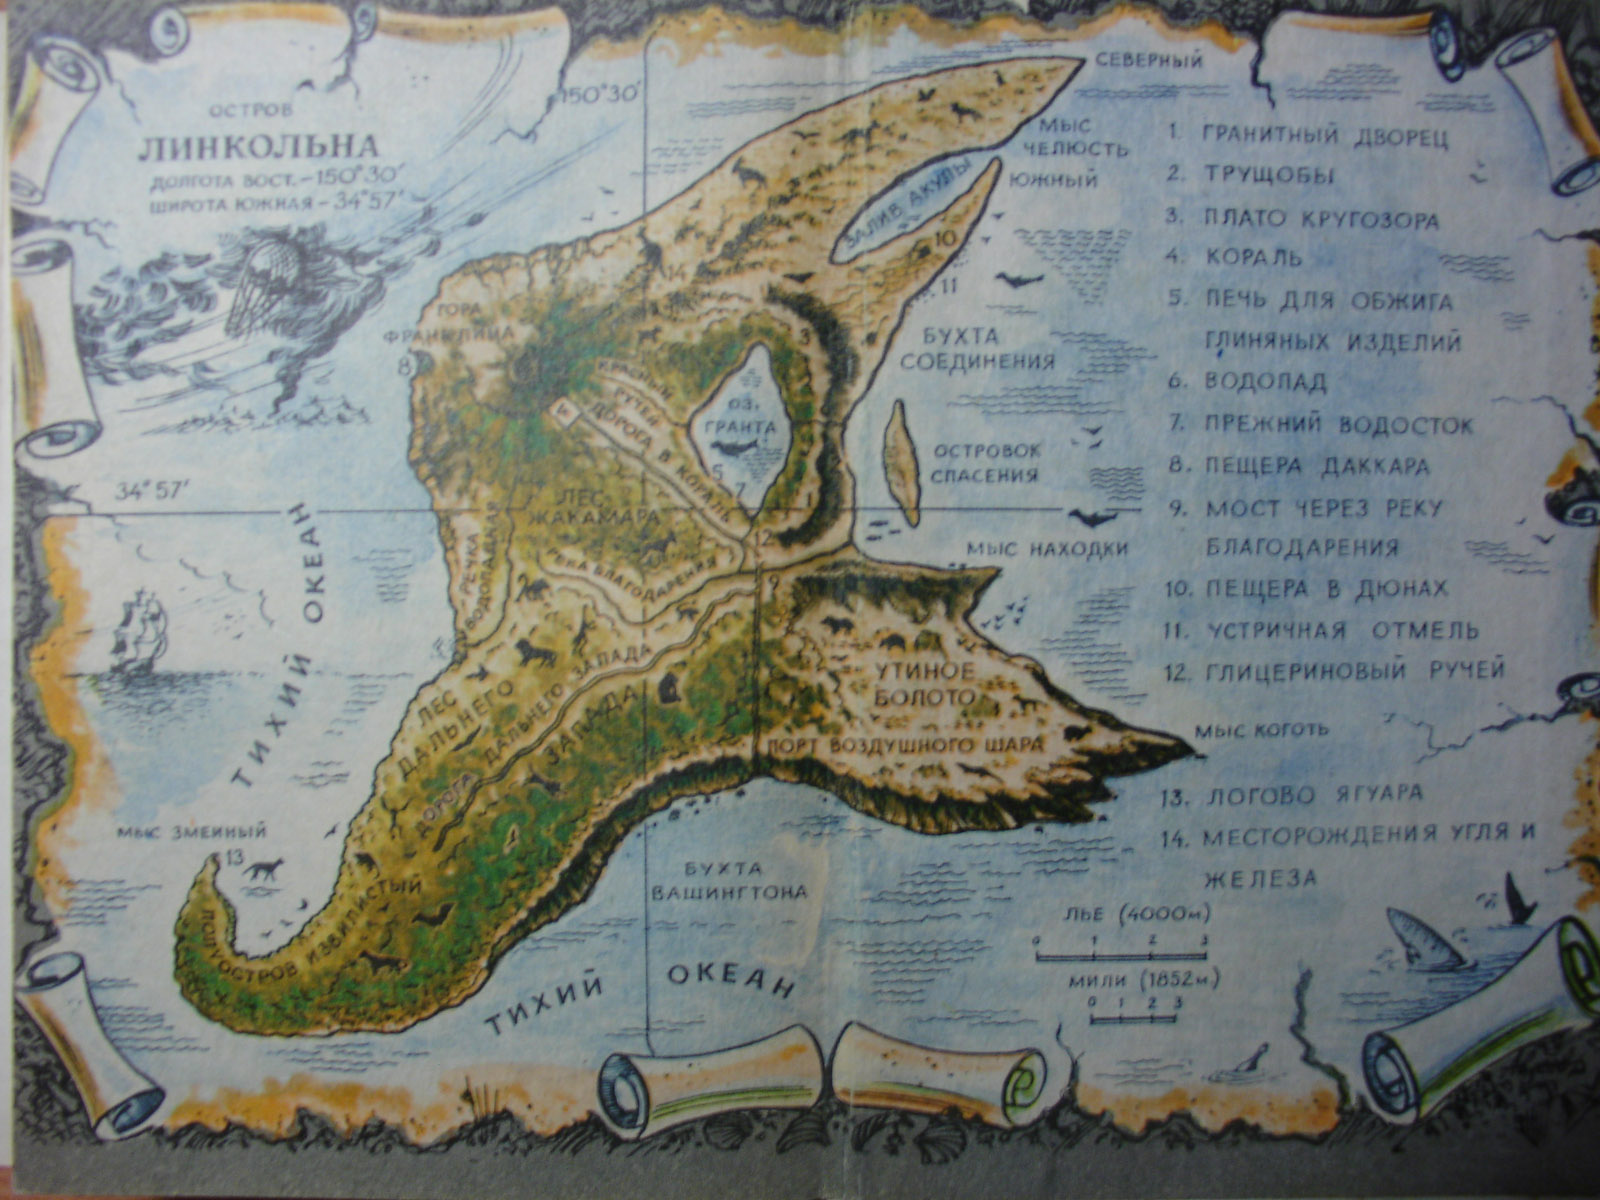 journey 2 mysterious island map